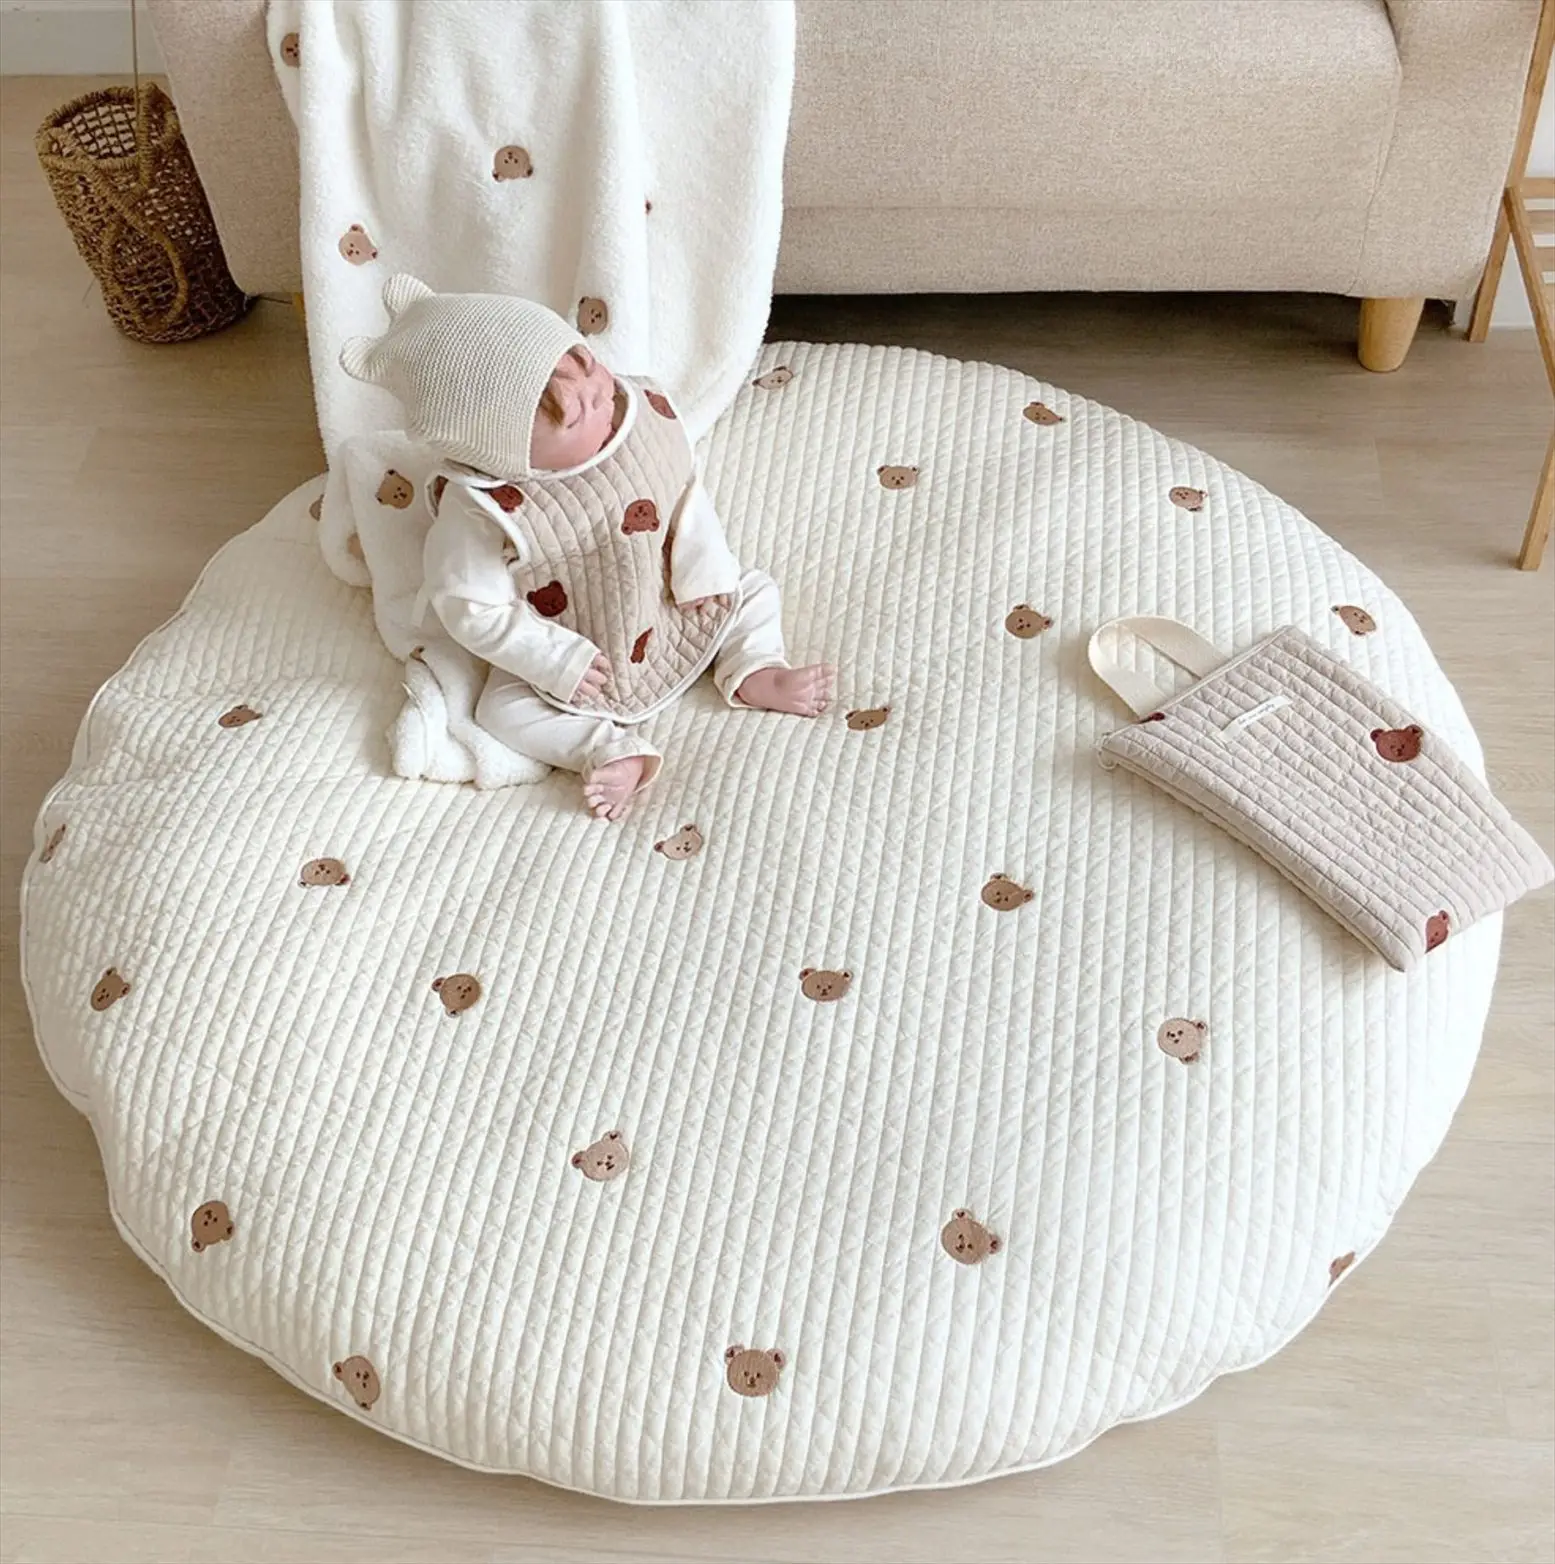 INS Baby Bear Rabbit Embroidery Round Mat Photo Prop Play Tents Decoration Round Nursery Rug Newborn Toy Crawling Padded